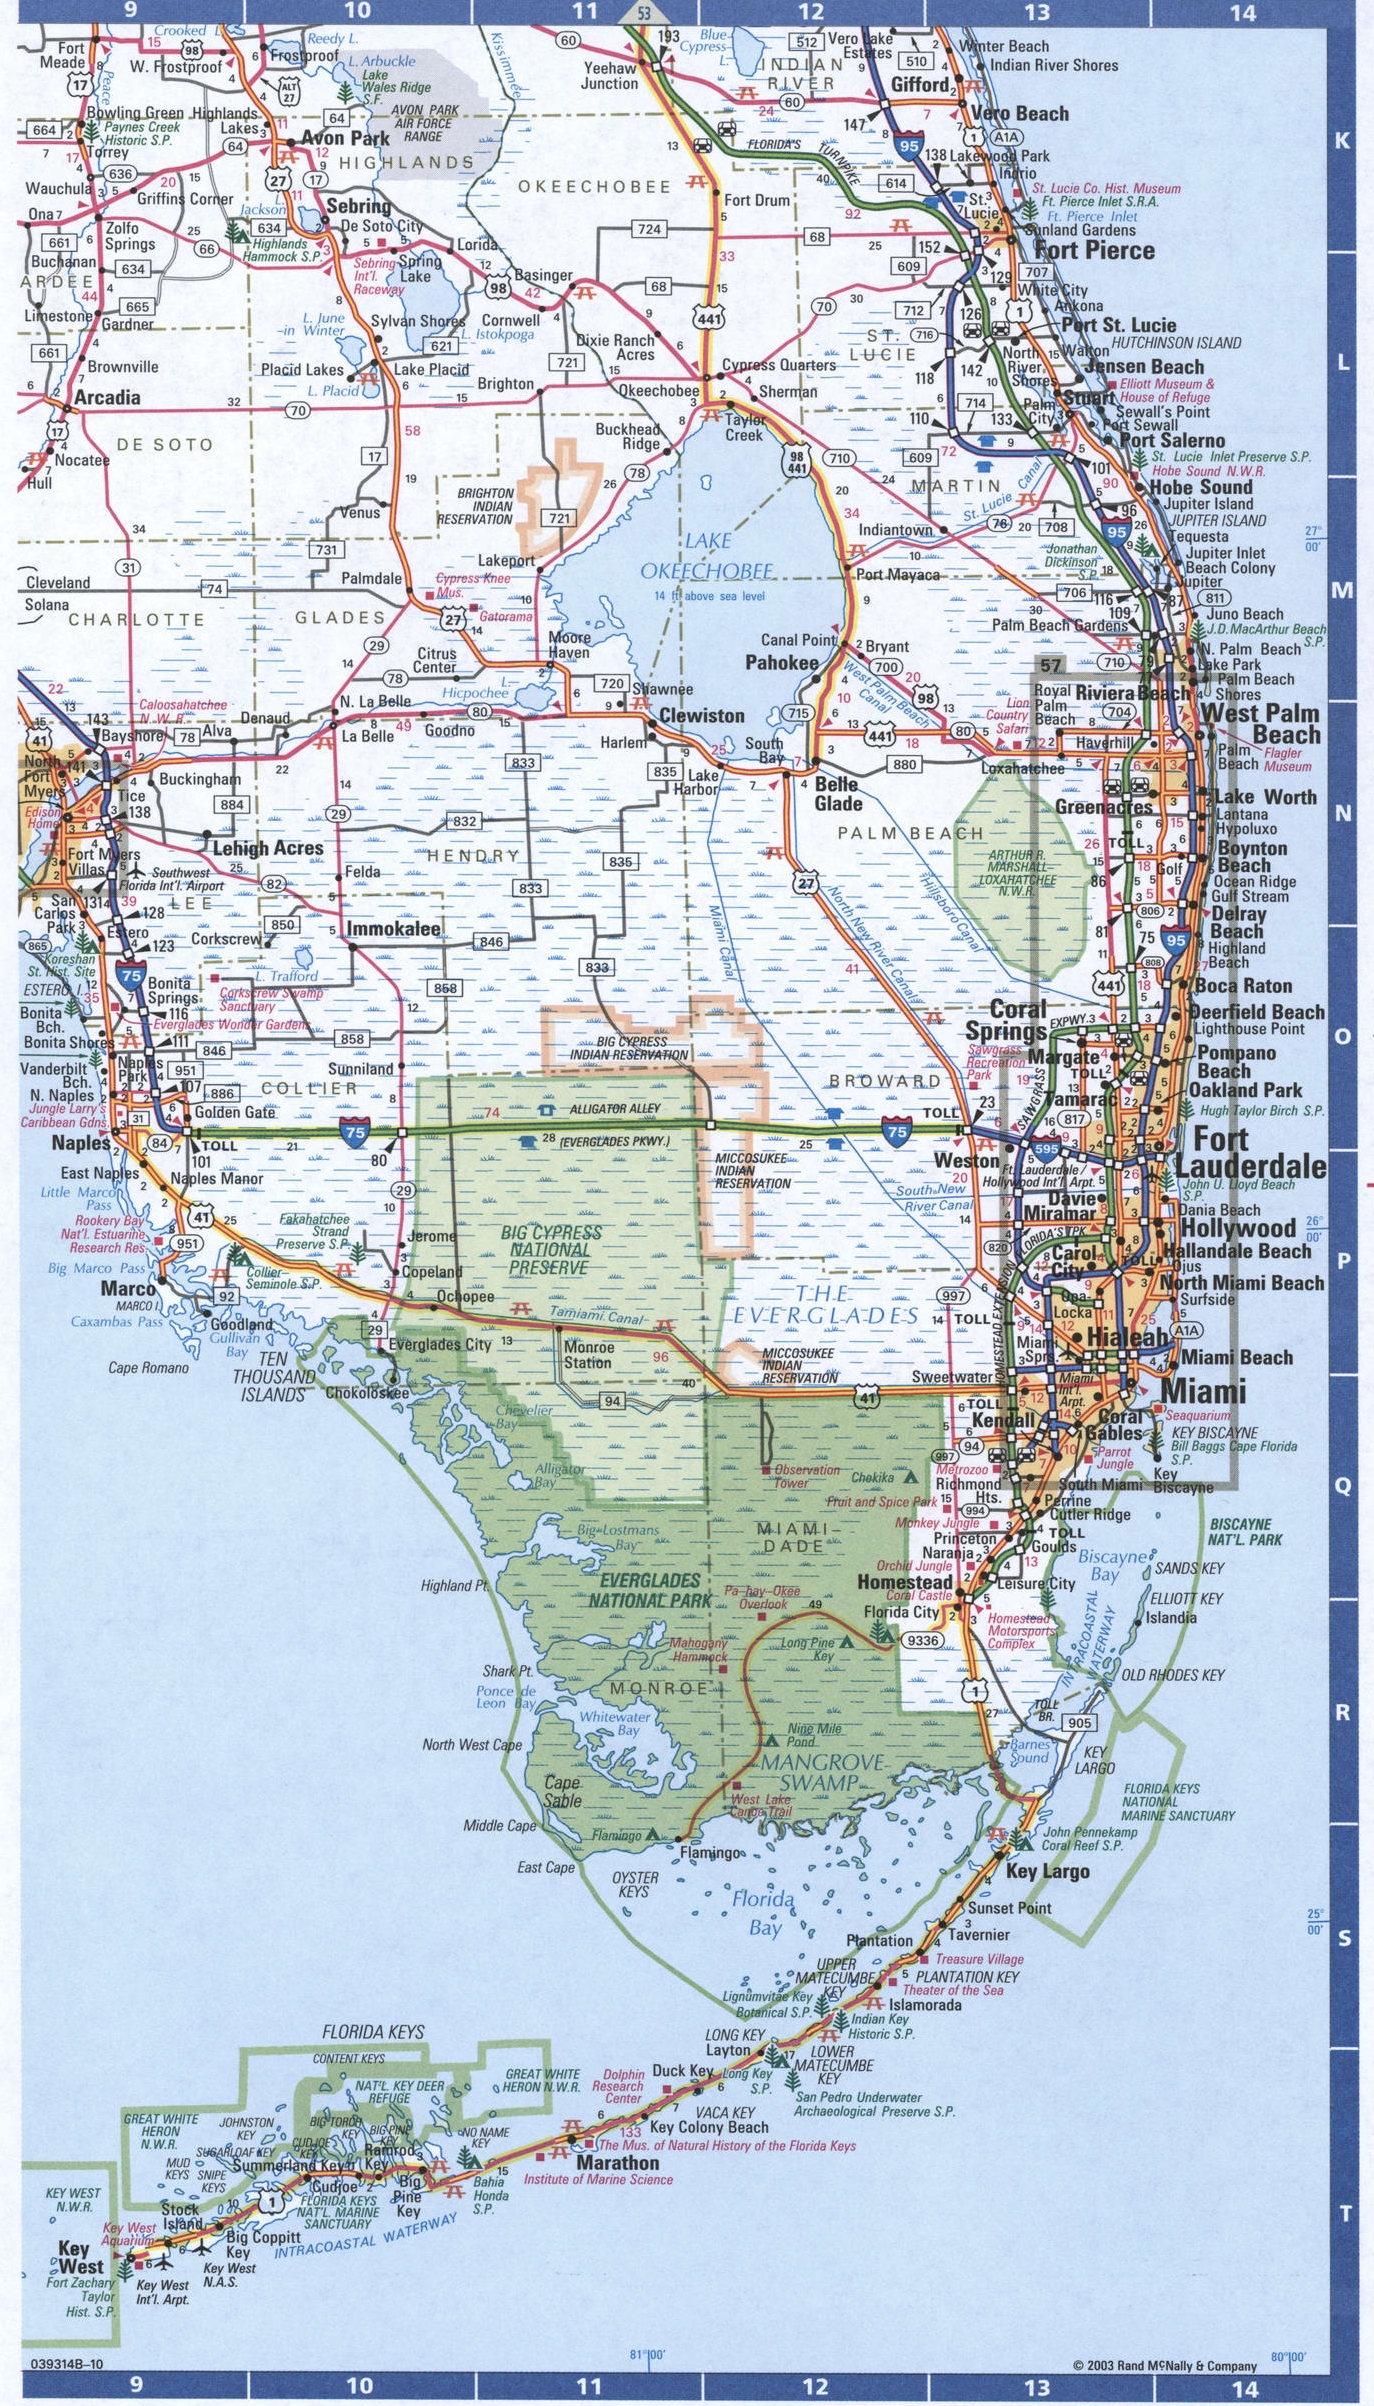 South of Florida state road map image. Detailed map of Southern Florida